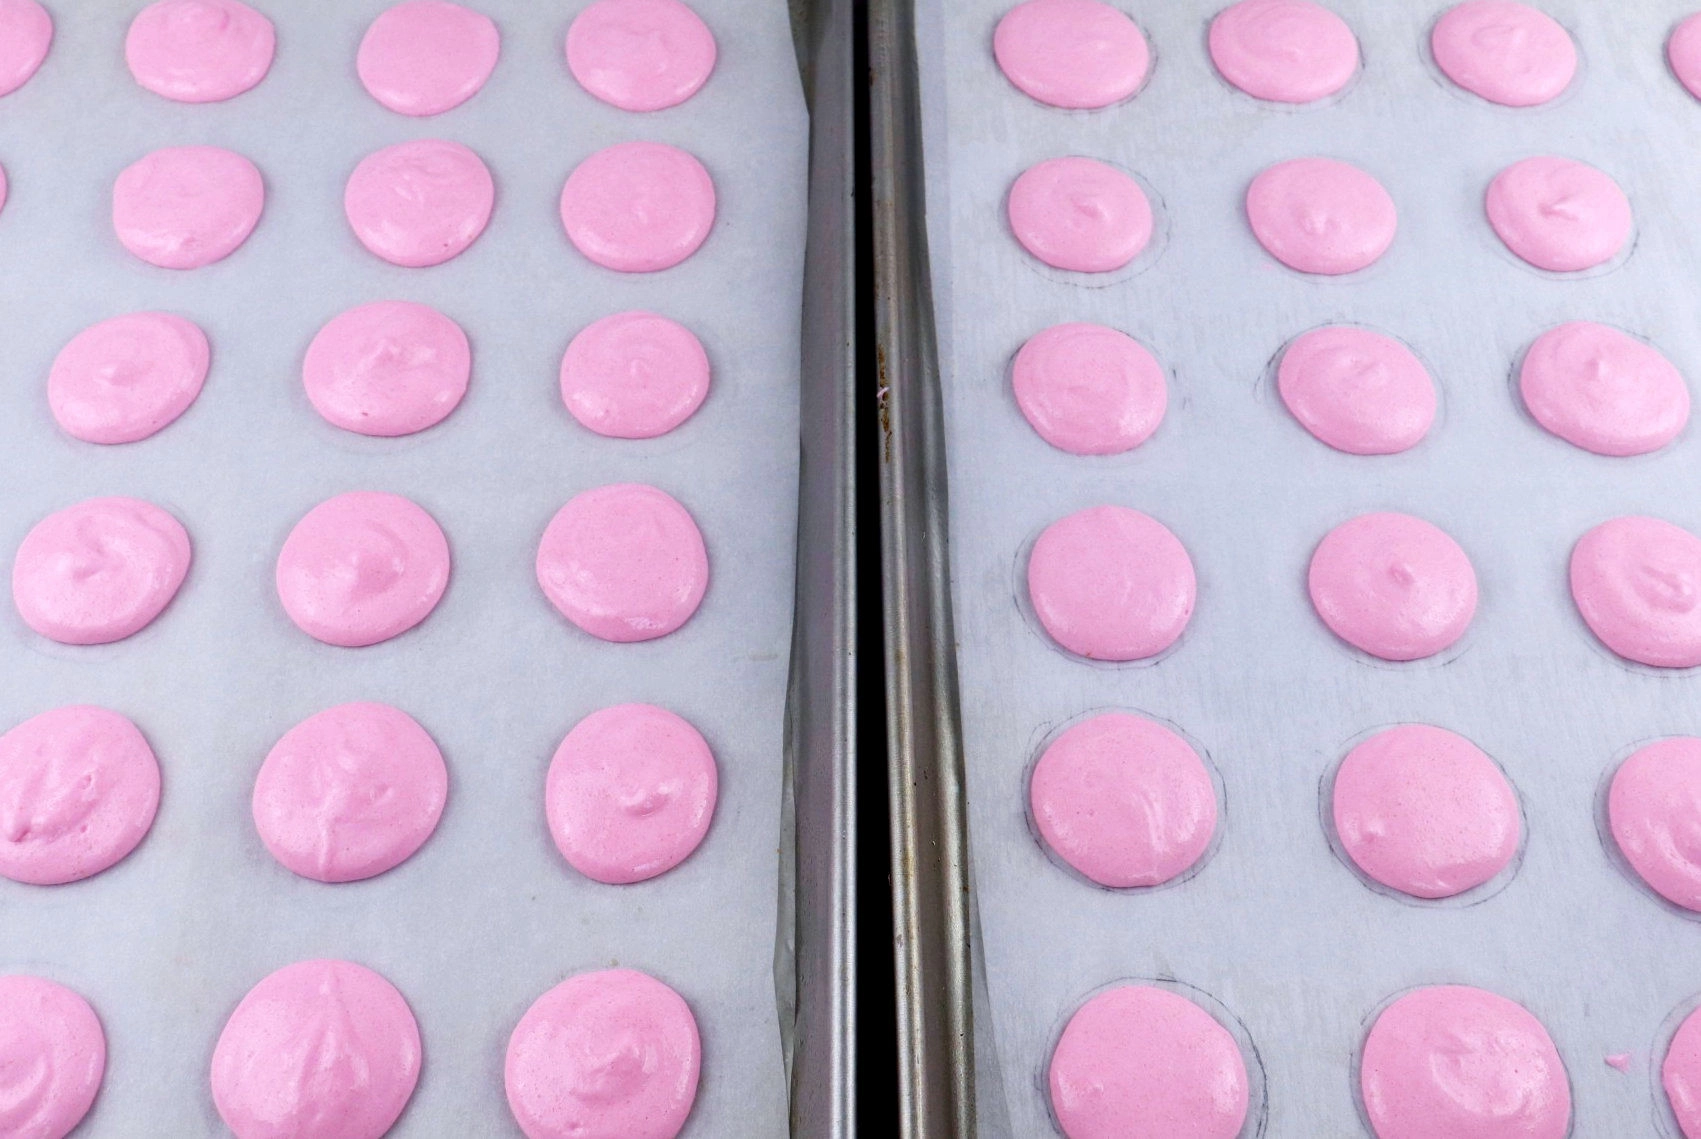 Piped Macaron Batter